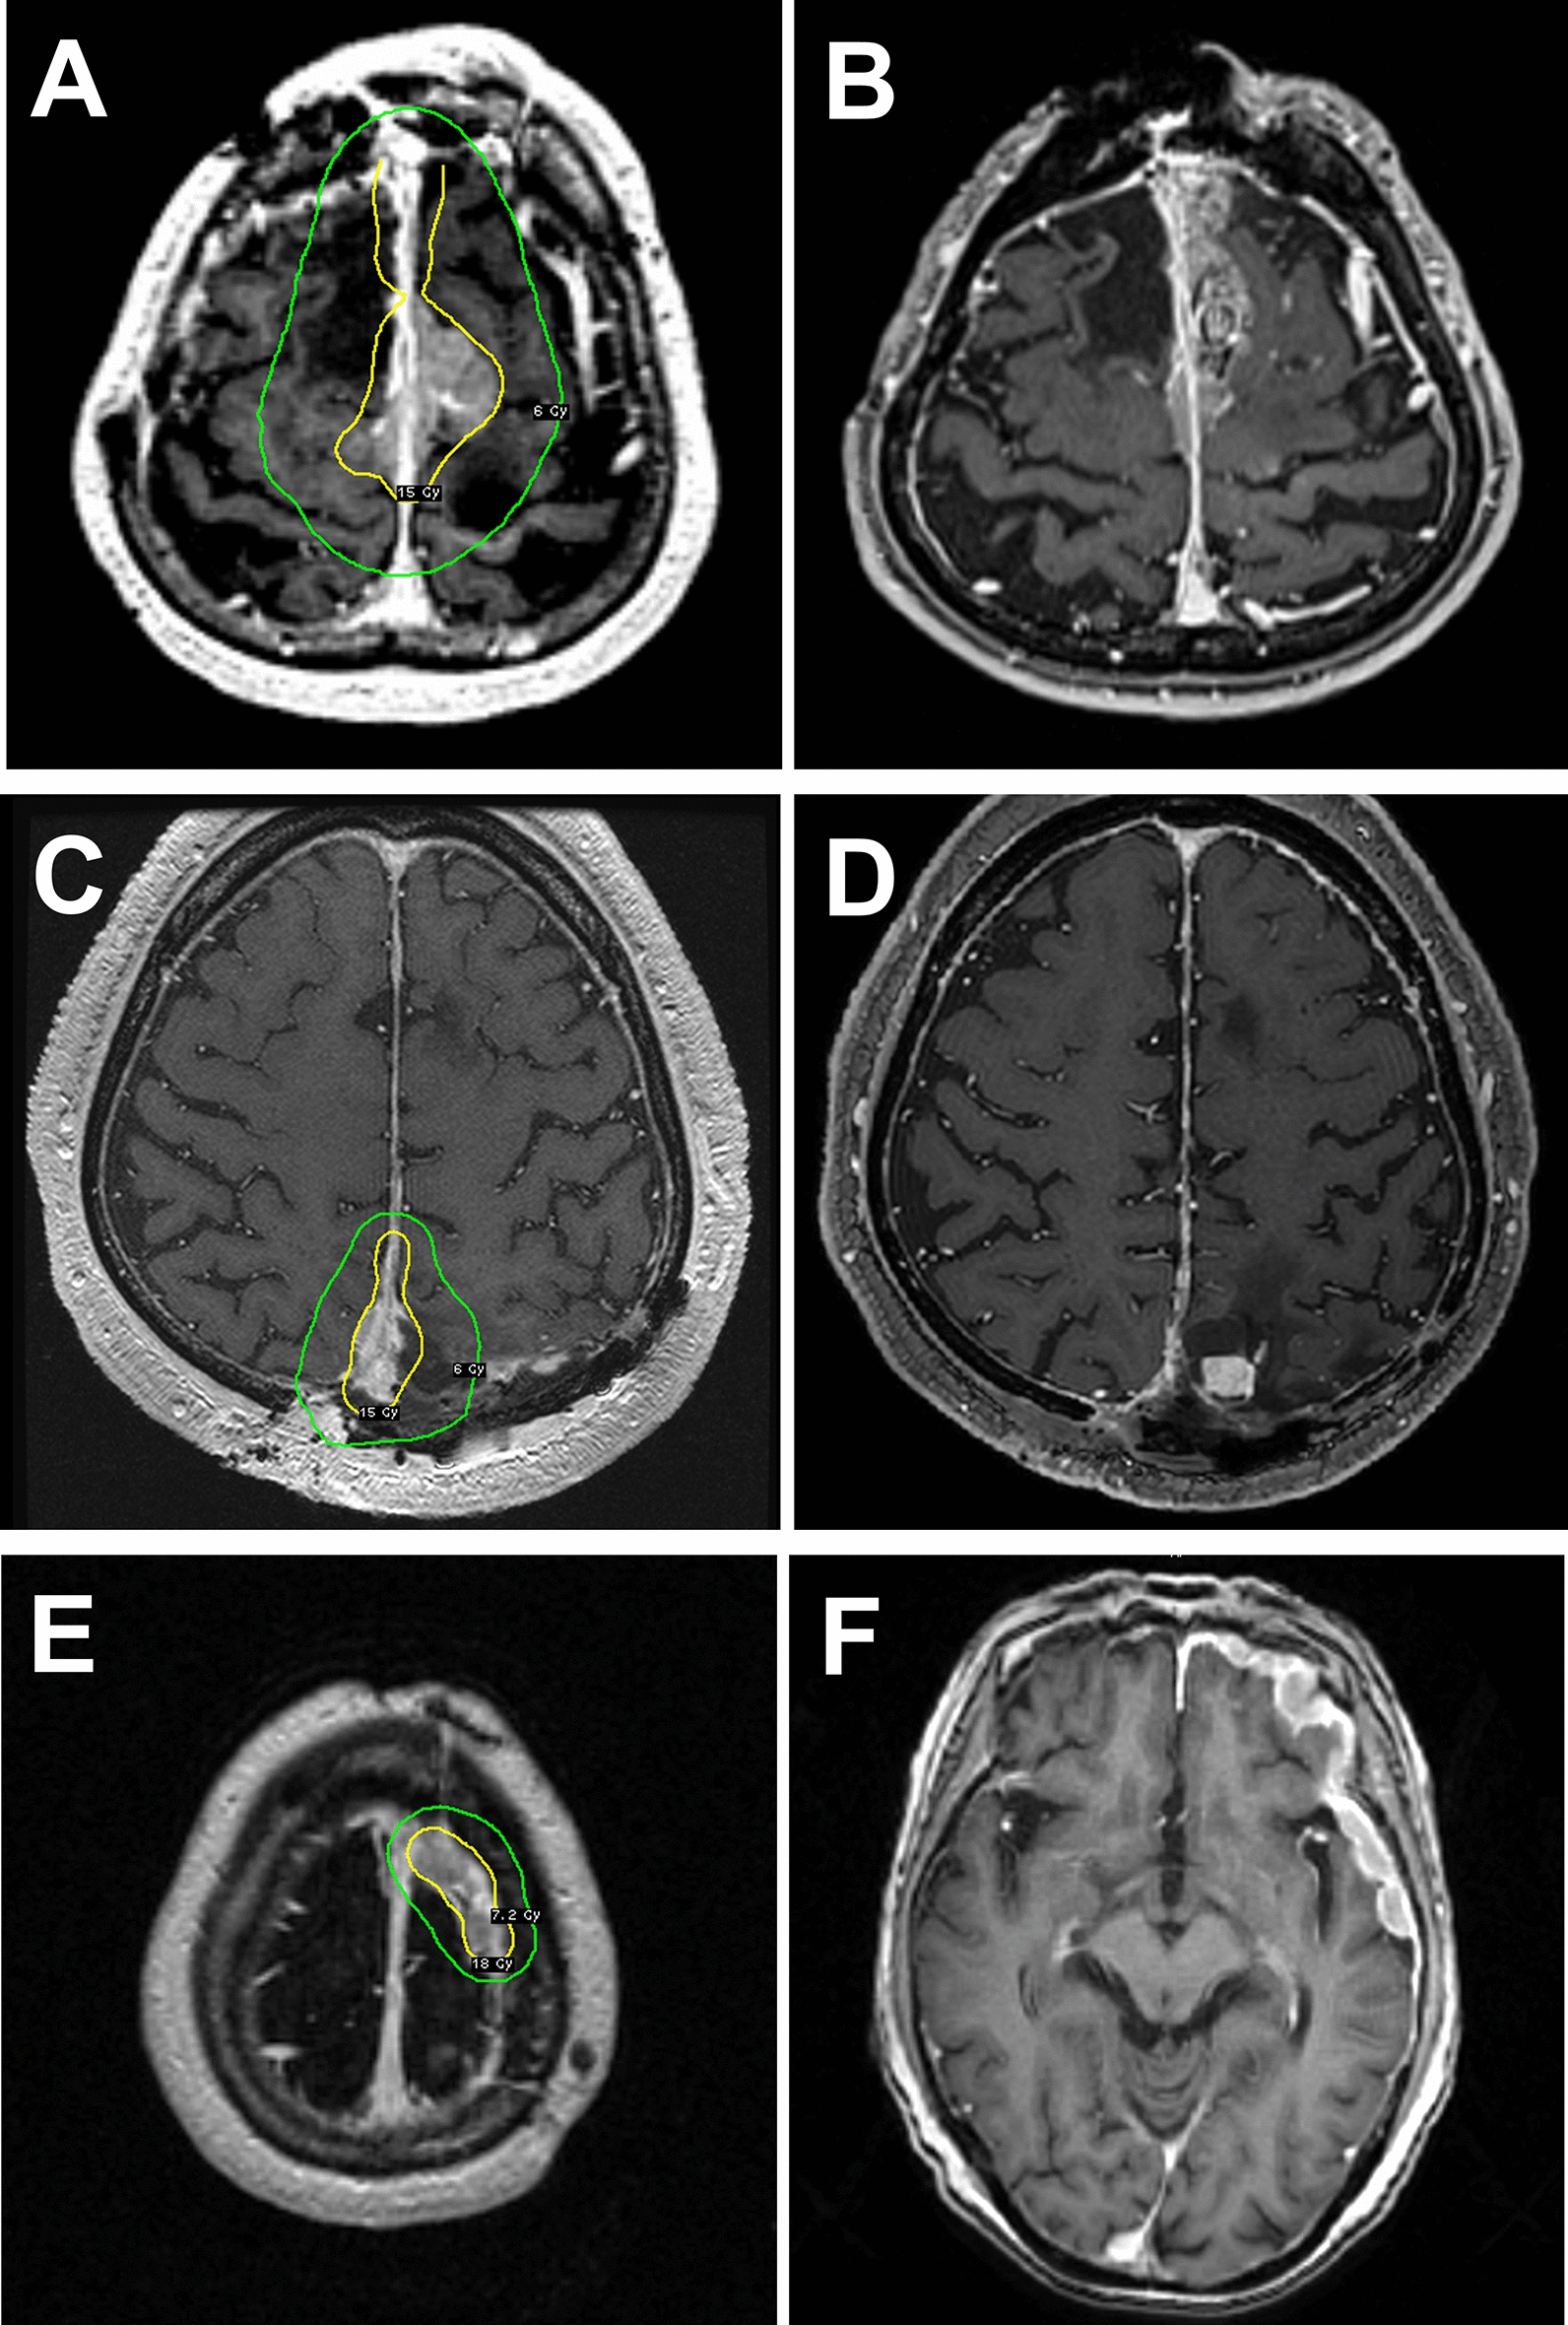 Ki-67 labeling index predicts tumor progression patterns and survival in patients with atypical meningiomas following stereotactic radiosurgery